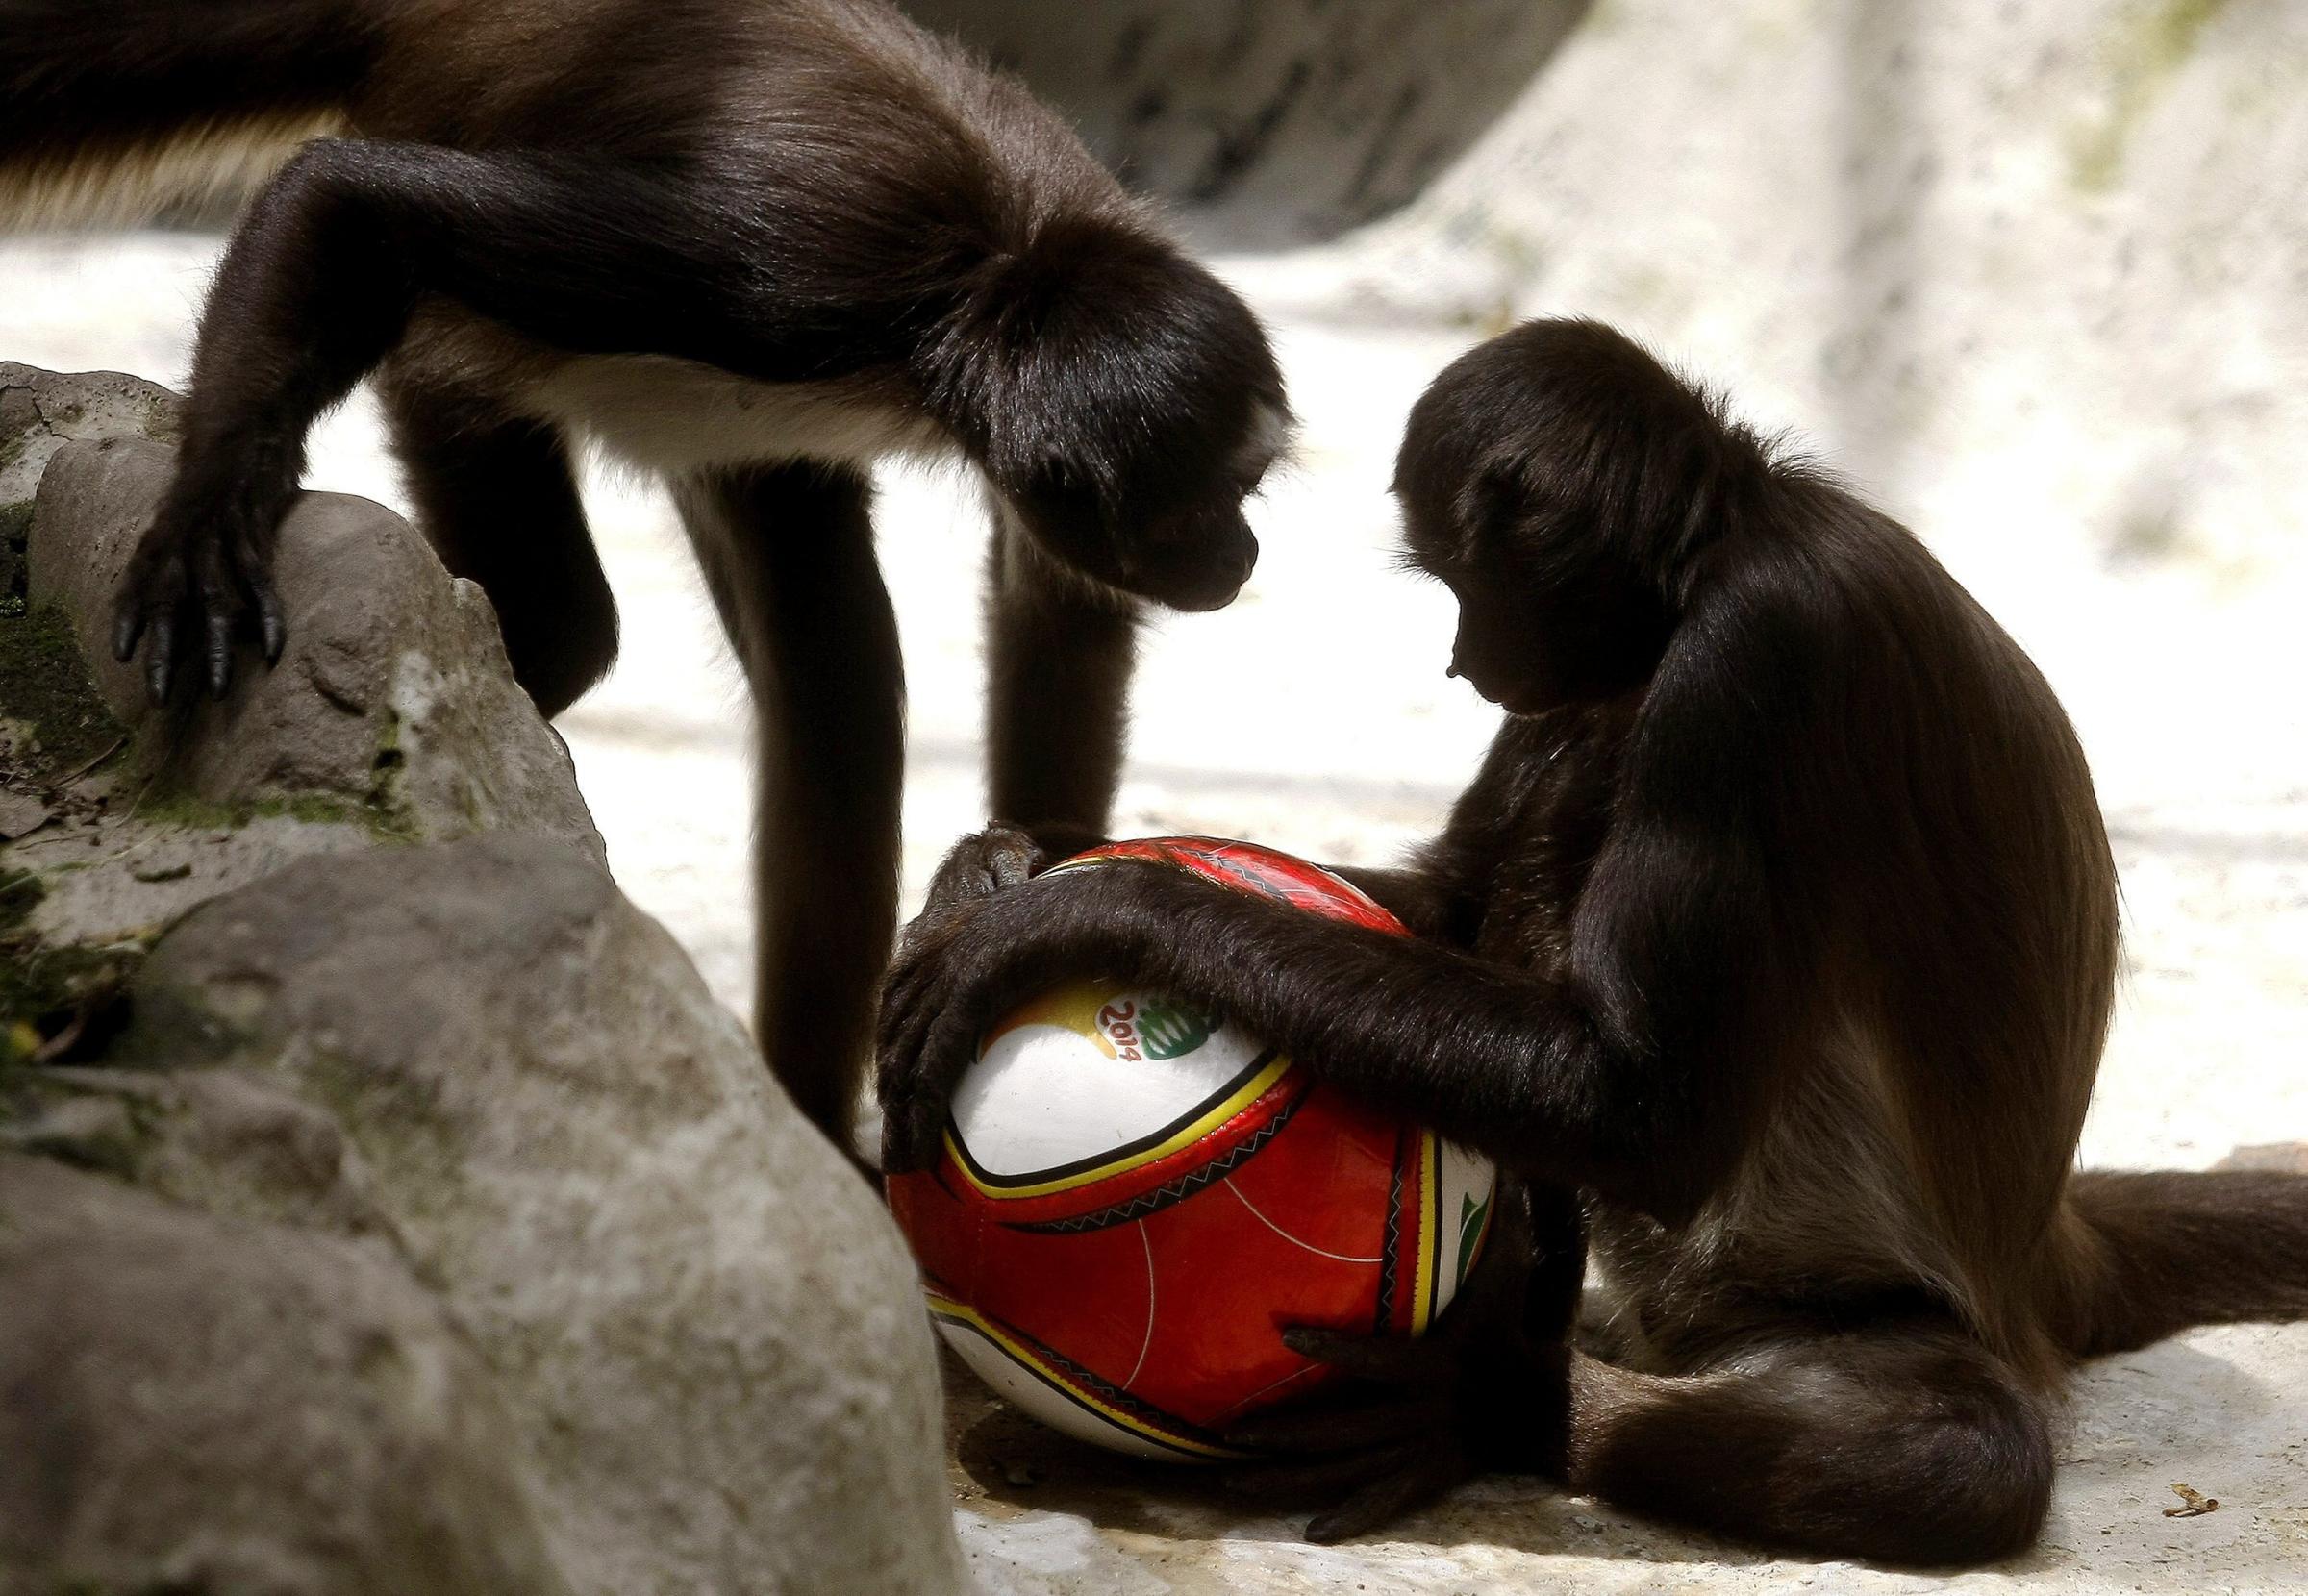 Two monkey play with a soccer ball at the Zoo of Santa Fe in Medellin, Colombia, on June 12, 2014.